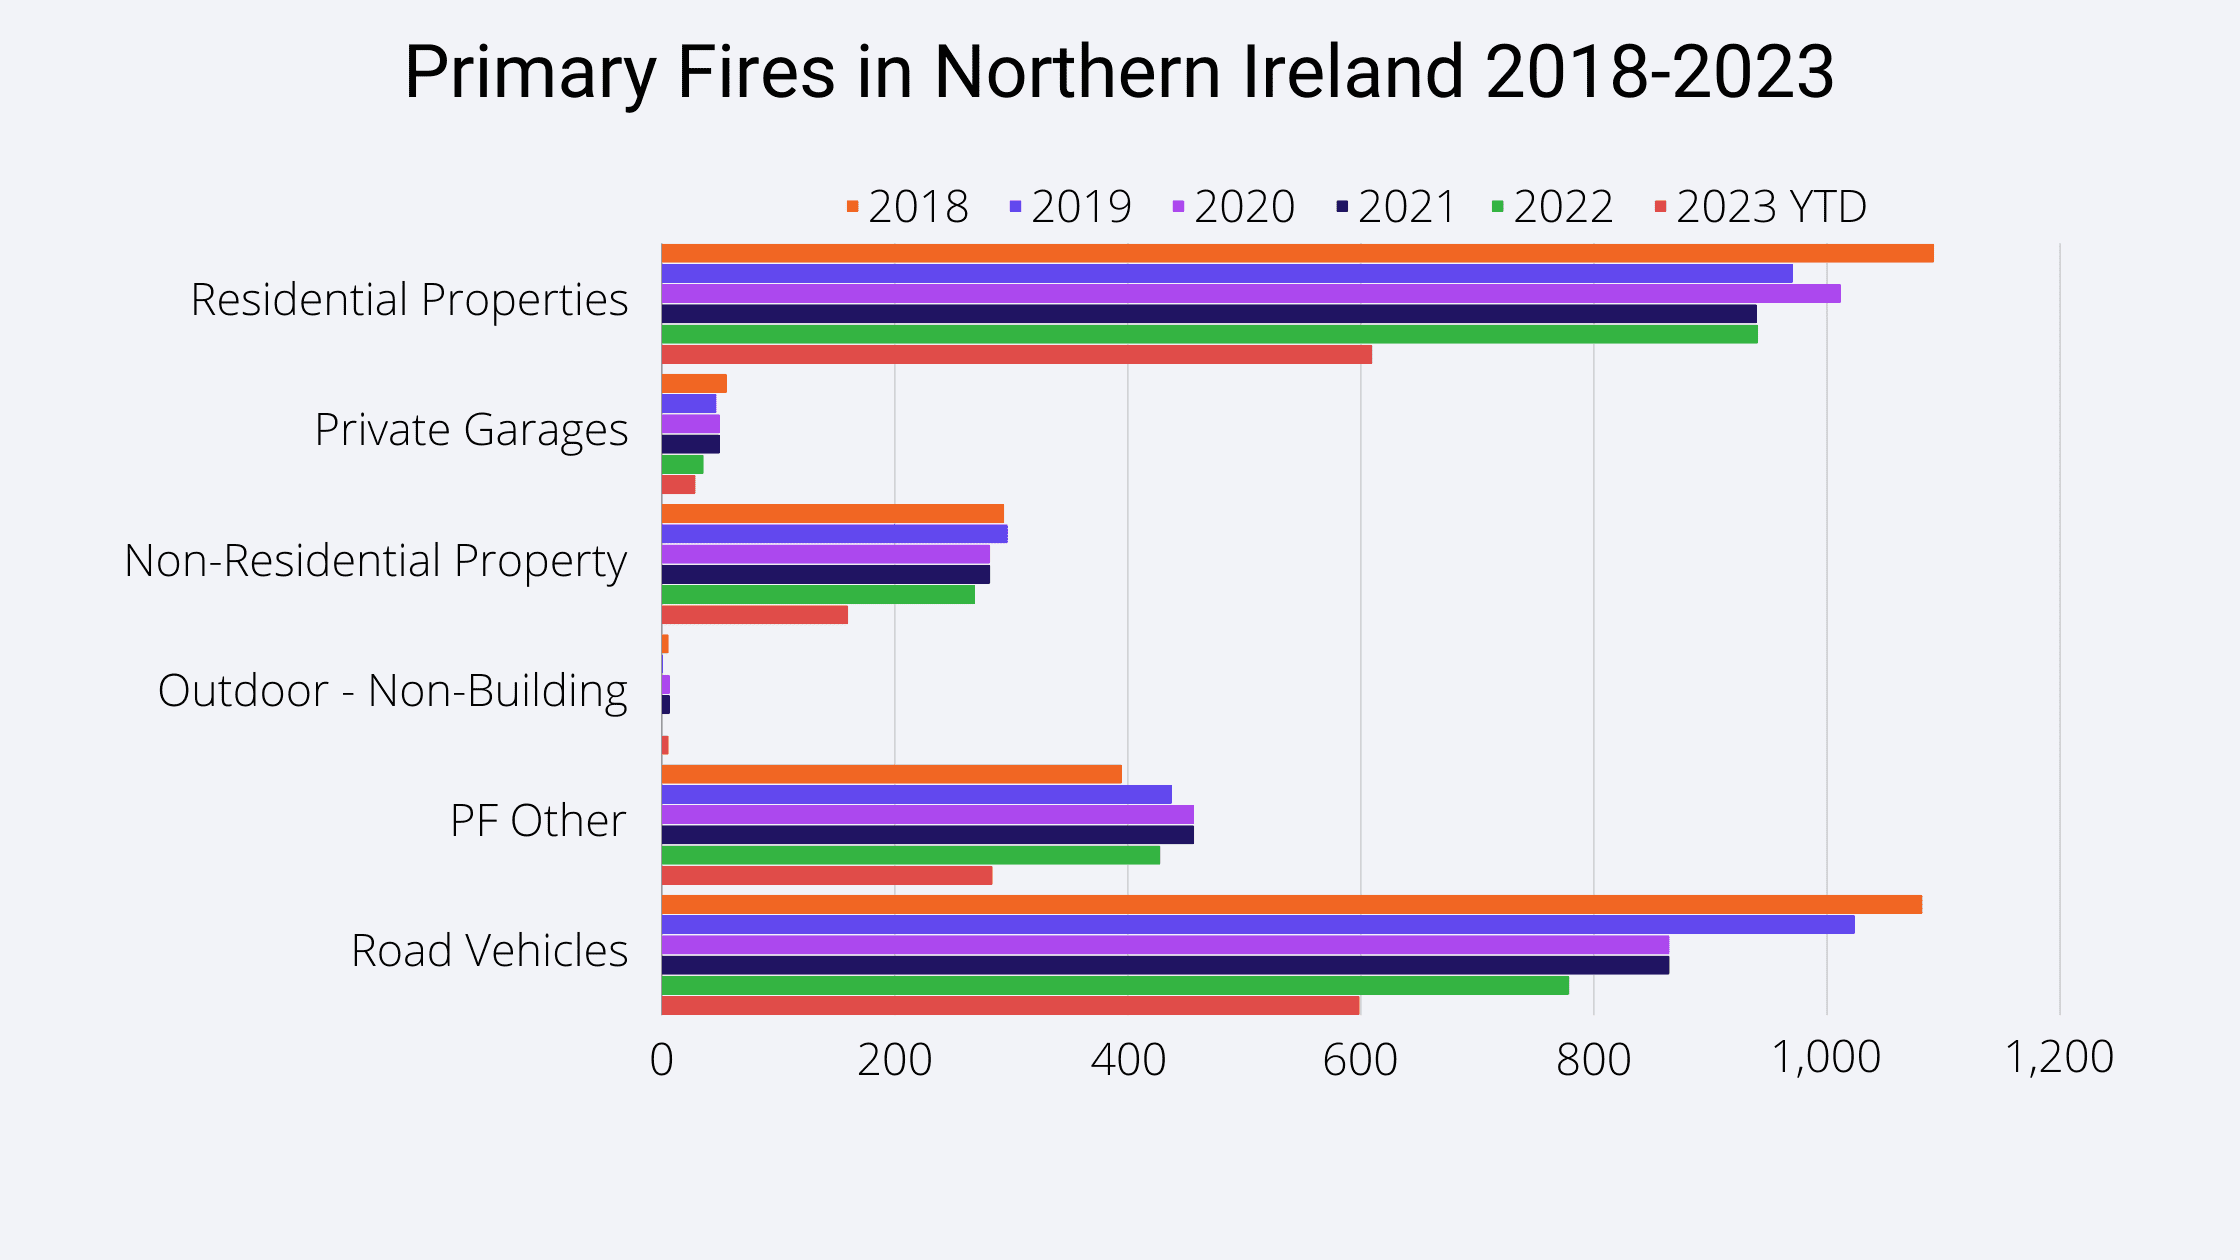 Primary Fires in Northern Ireland 2018-2023 chart